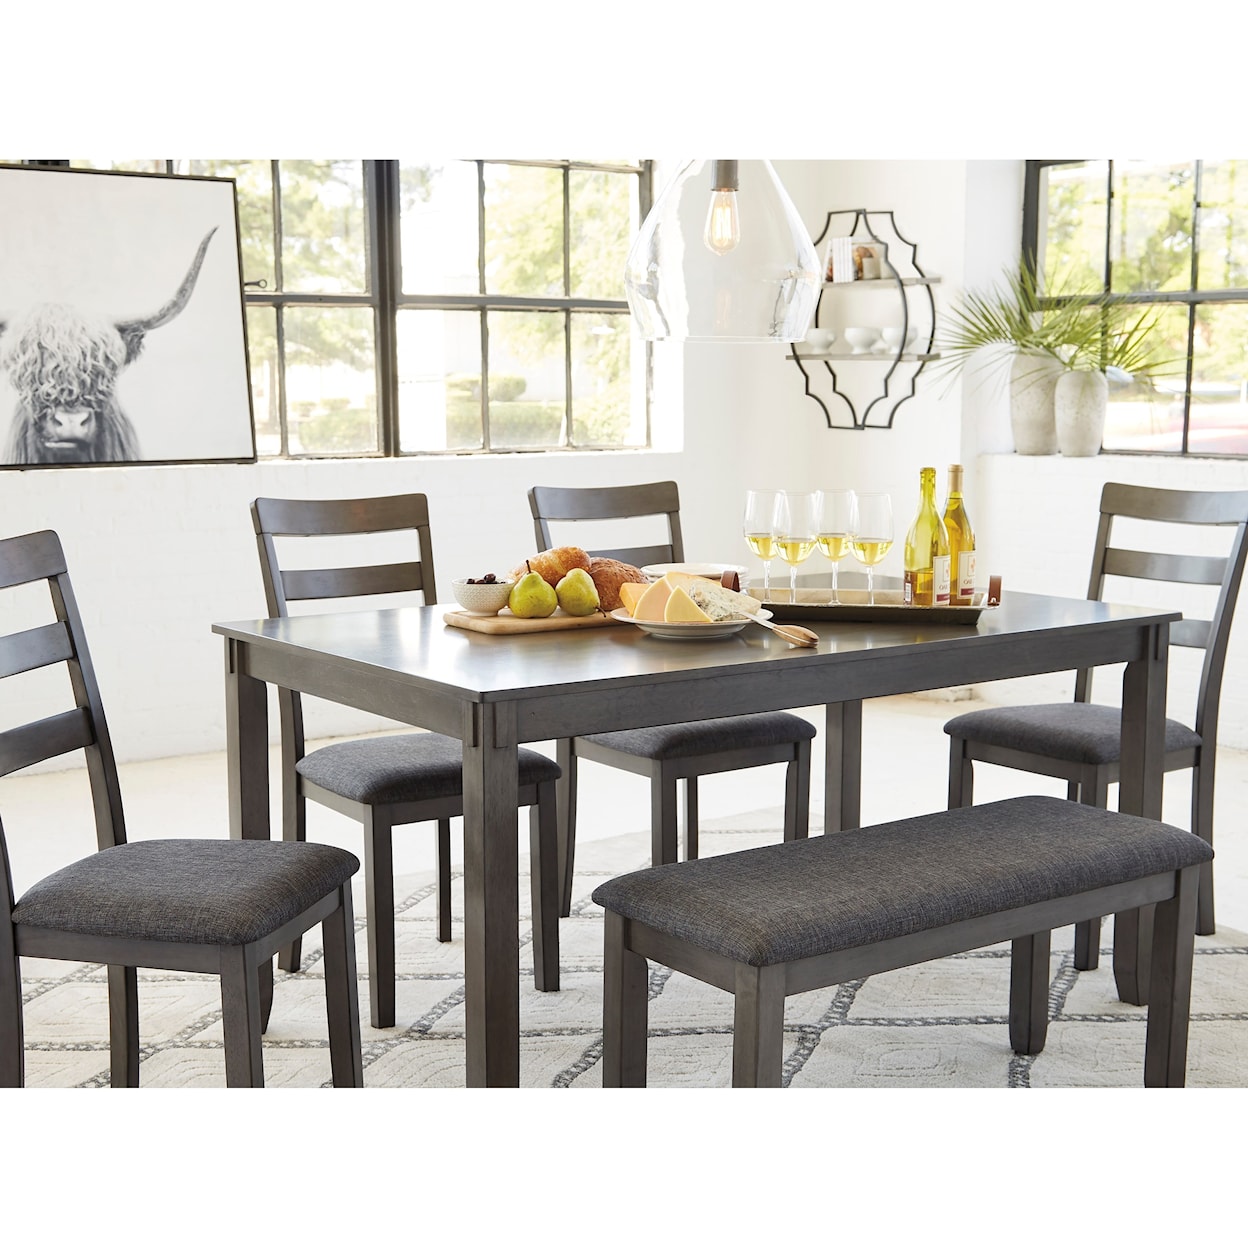 Signature Design by Ashley Bridson 6-Piece Rectangular Dining Room Table Set